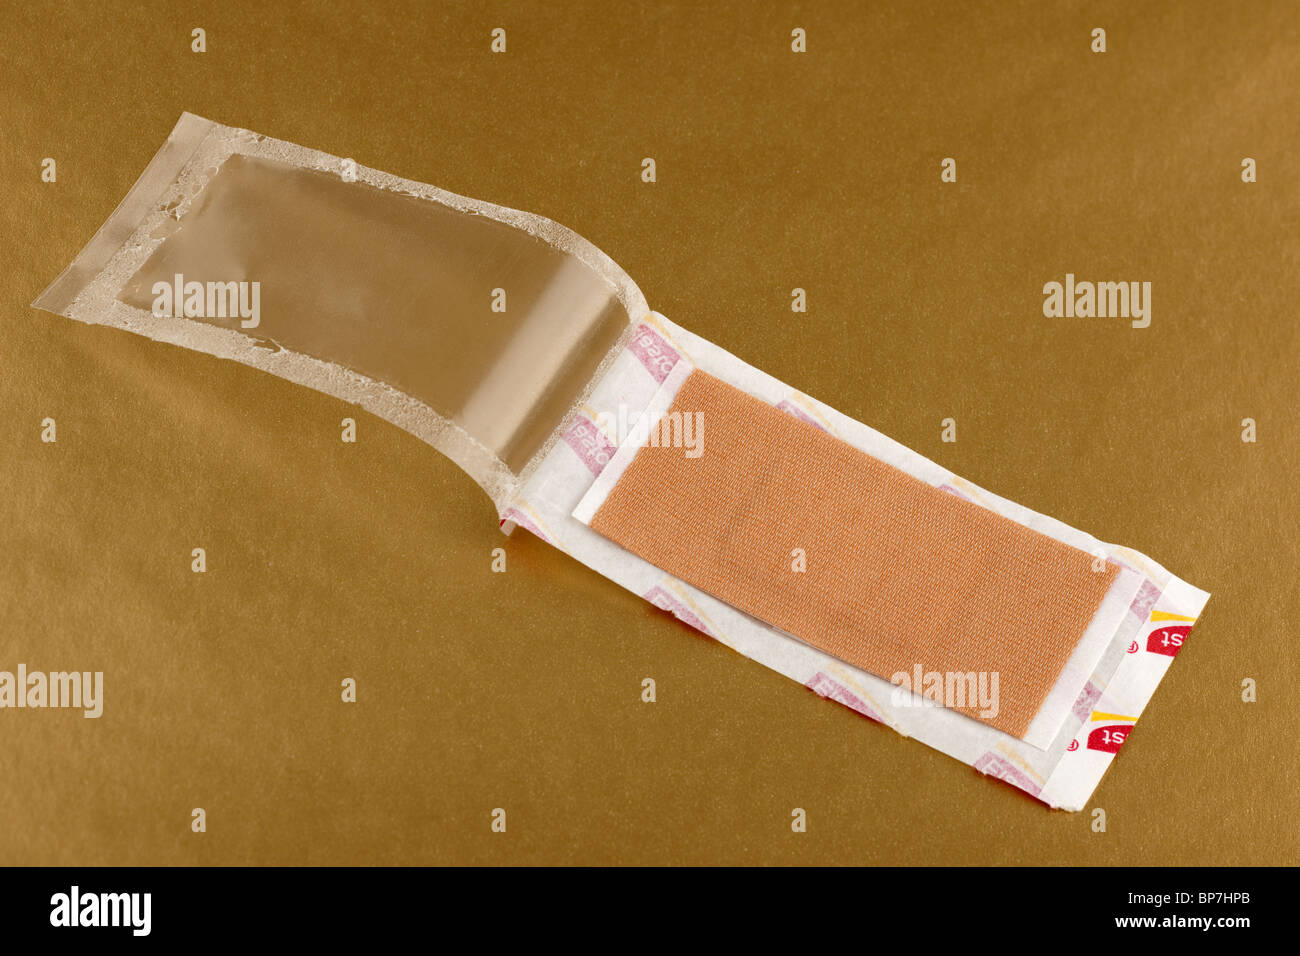 Plaster inside its opened protective seal Stock Photo